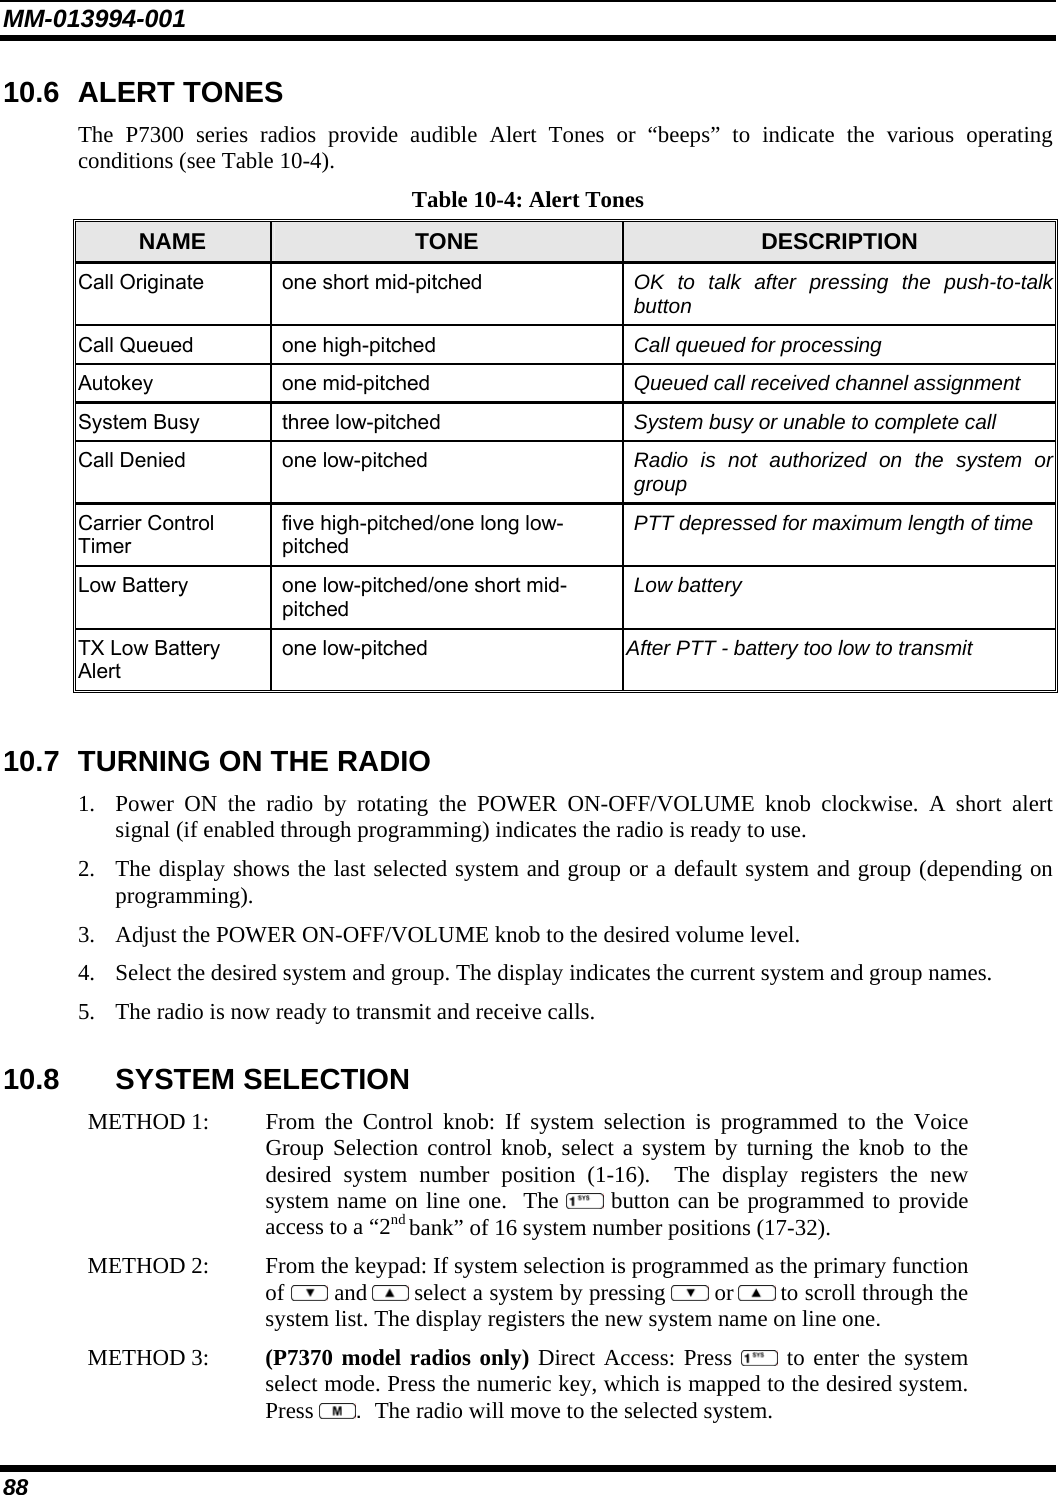 MM-013994-001 88 10.6 ALERT TONES The P7300 series radios provide audible Alert Tones or “beeps” to indicate the various operating conditions (see Table 10-4). Table 10-4: Alert Tones NAME  TONE  DESCRIPTION Call Originate  one short mid-pitched  OK to talk after pressing the push-to-talk button Call Queued  one high-pitched  Call queued for processing Autokey one mid-pitched  Queued call received channel assignment System Busy  three low-pitched  System busy or unable to complete call Call Denied  one low-pitched  Radio is not authorized on the system or group Carrier Control Timer five high-pitched/one long low-pitched PTT depressed for maximum length of time Low Battery  one low-pitched/one short mid-pitched Low battery TX Low Battery Alert one low-pitched  After PTT - battery too low to transmit  10.7  TURNING ON THE RADIO 1. Power ON the radio by rotating the POWER ON-OFF/VOLUME knob clockwise. A short alert signal (if enabled through programming) indicates the radio is ready to use.  2. The display shows the last selected system and group or a default system and group (depending on programming).  3. Adjust the POWER ON-OFF/VOLUME knob to the desired volume level.  4. Select the desired system and group. The display indicates the current system and group names.  5. The radio is now ready to transmit and receive calls. 10.8 SYSTEM SELECTION METHOD 1:   From the Control knob: If system selection is programmed to the Voice Group Selection control knob, select a system by turning the knob to thedesired system number position (1-16).  The display registers the new system name on line one.  The  button can be programmed to provide access to a “2nd bank” of 16 system number positions (17-32). METHOD 2:   From the keypad: If system selection is programmed as the primary function of  and  select a system by pressing   or  to scroll through the system list. The display registers the new system name on line one.  METHOD 3:   (P7370 model radios only) Direct Access: Press  to enter the system select mode. Press the numeric key, which is mapped to the desired system.Press  .  The radio will move to the selected system.  